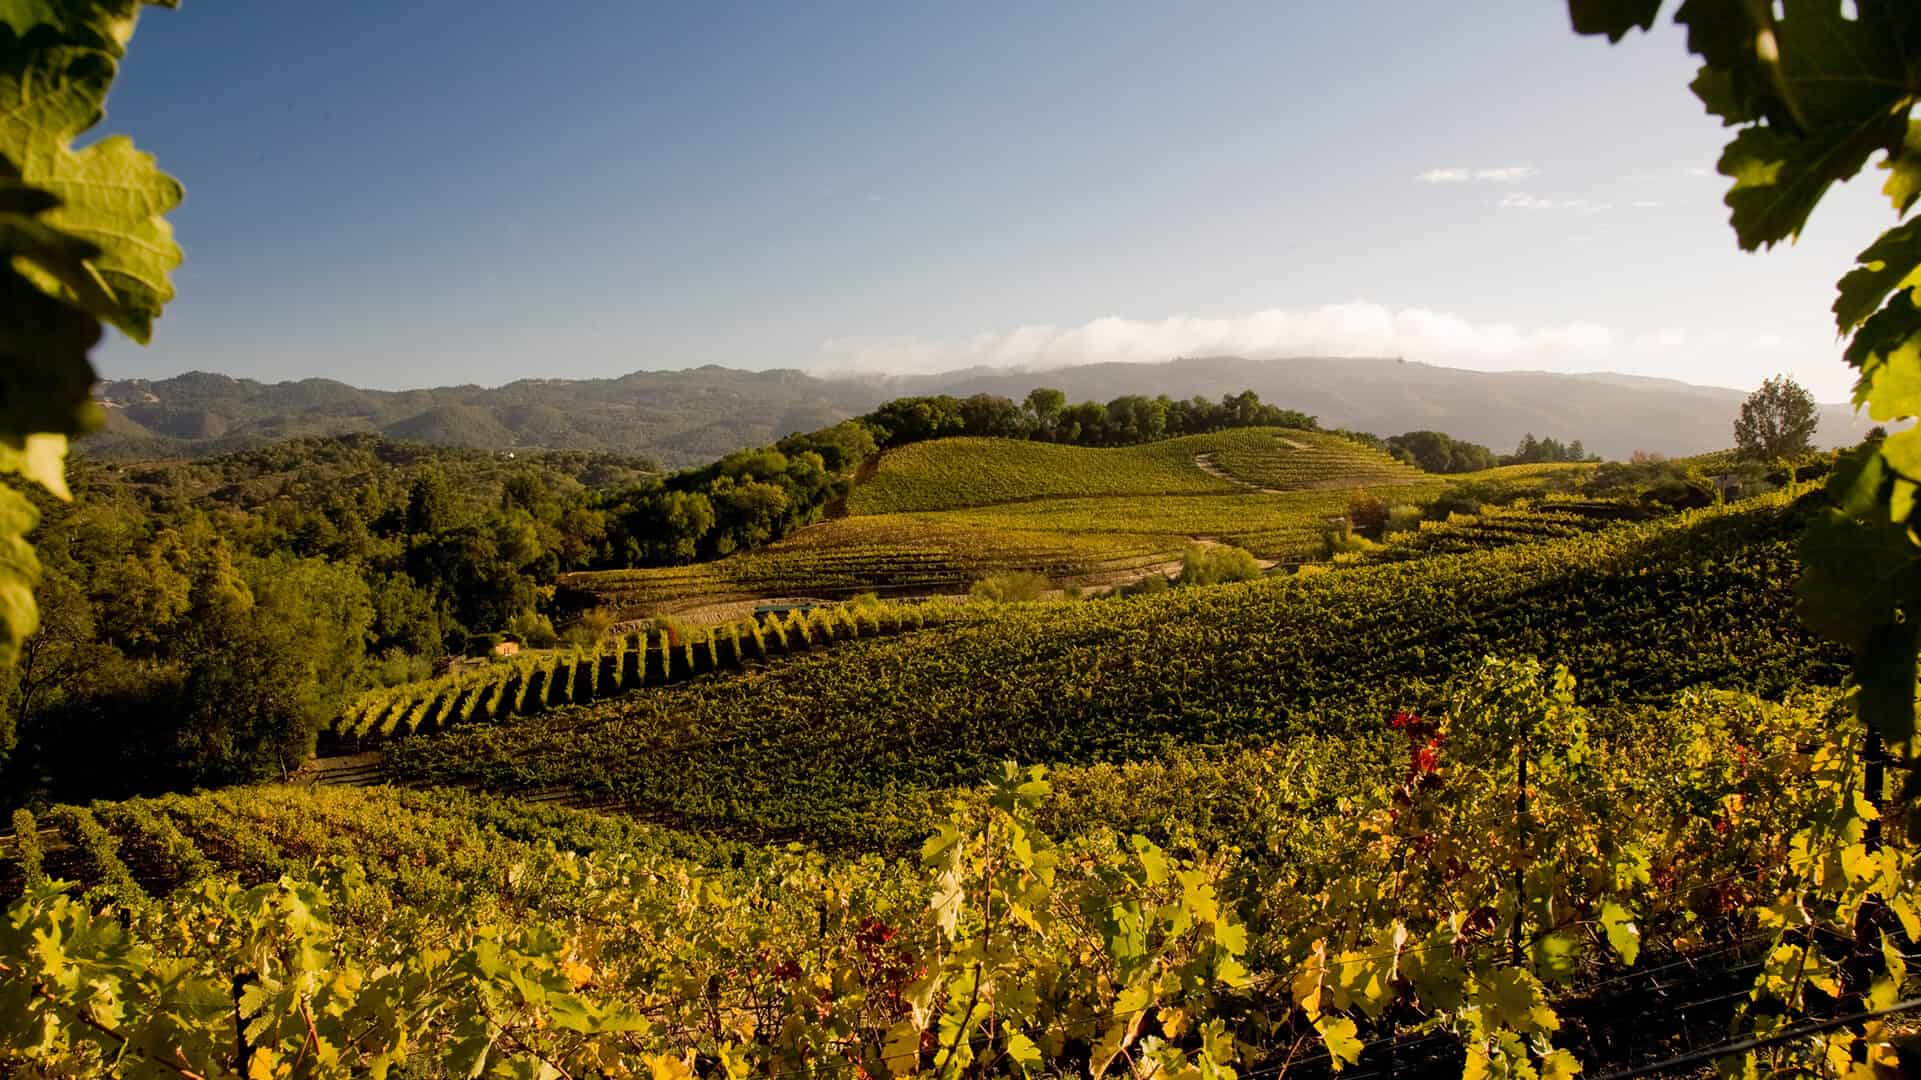 View of Napa valley wine country. Landscape vineyard photography, wine tours with Santarosa.limo company